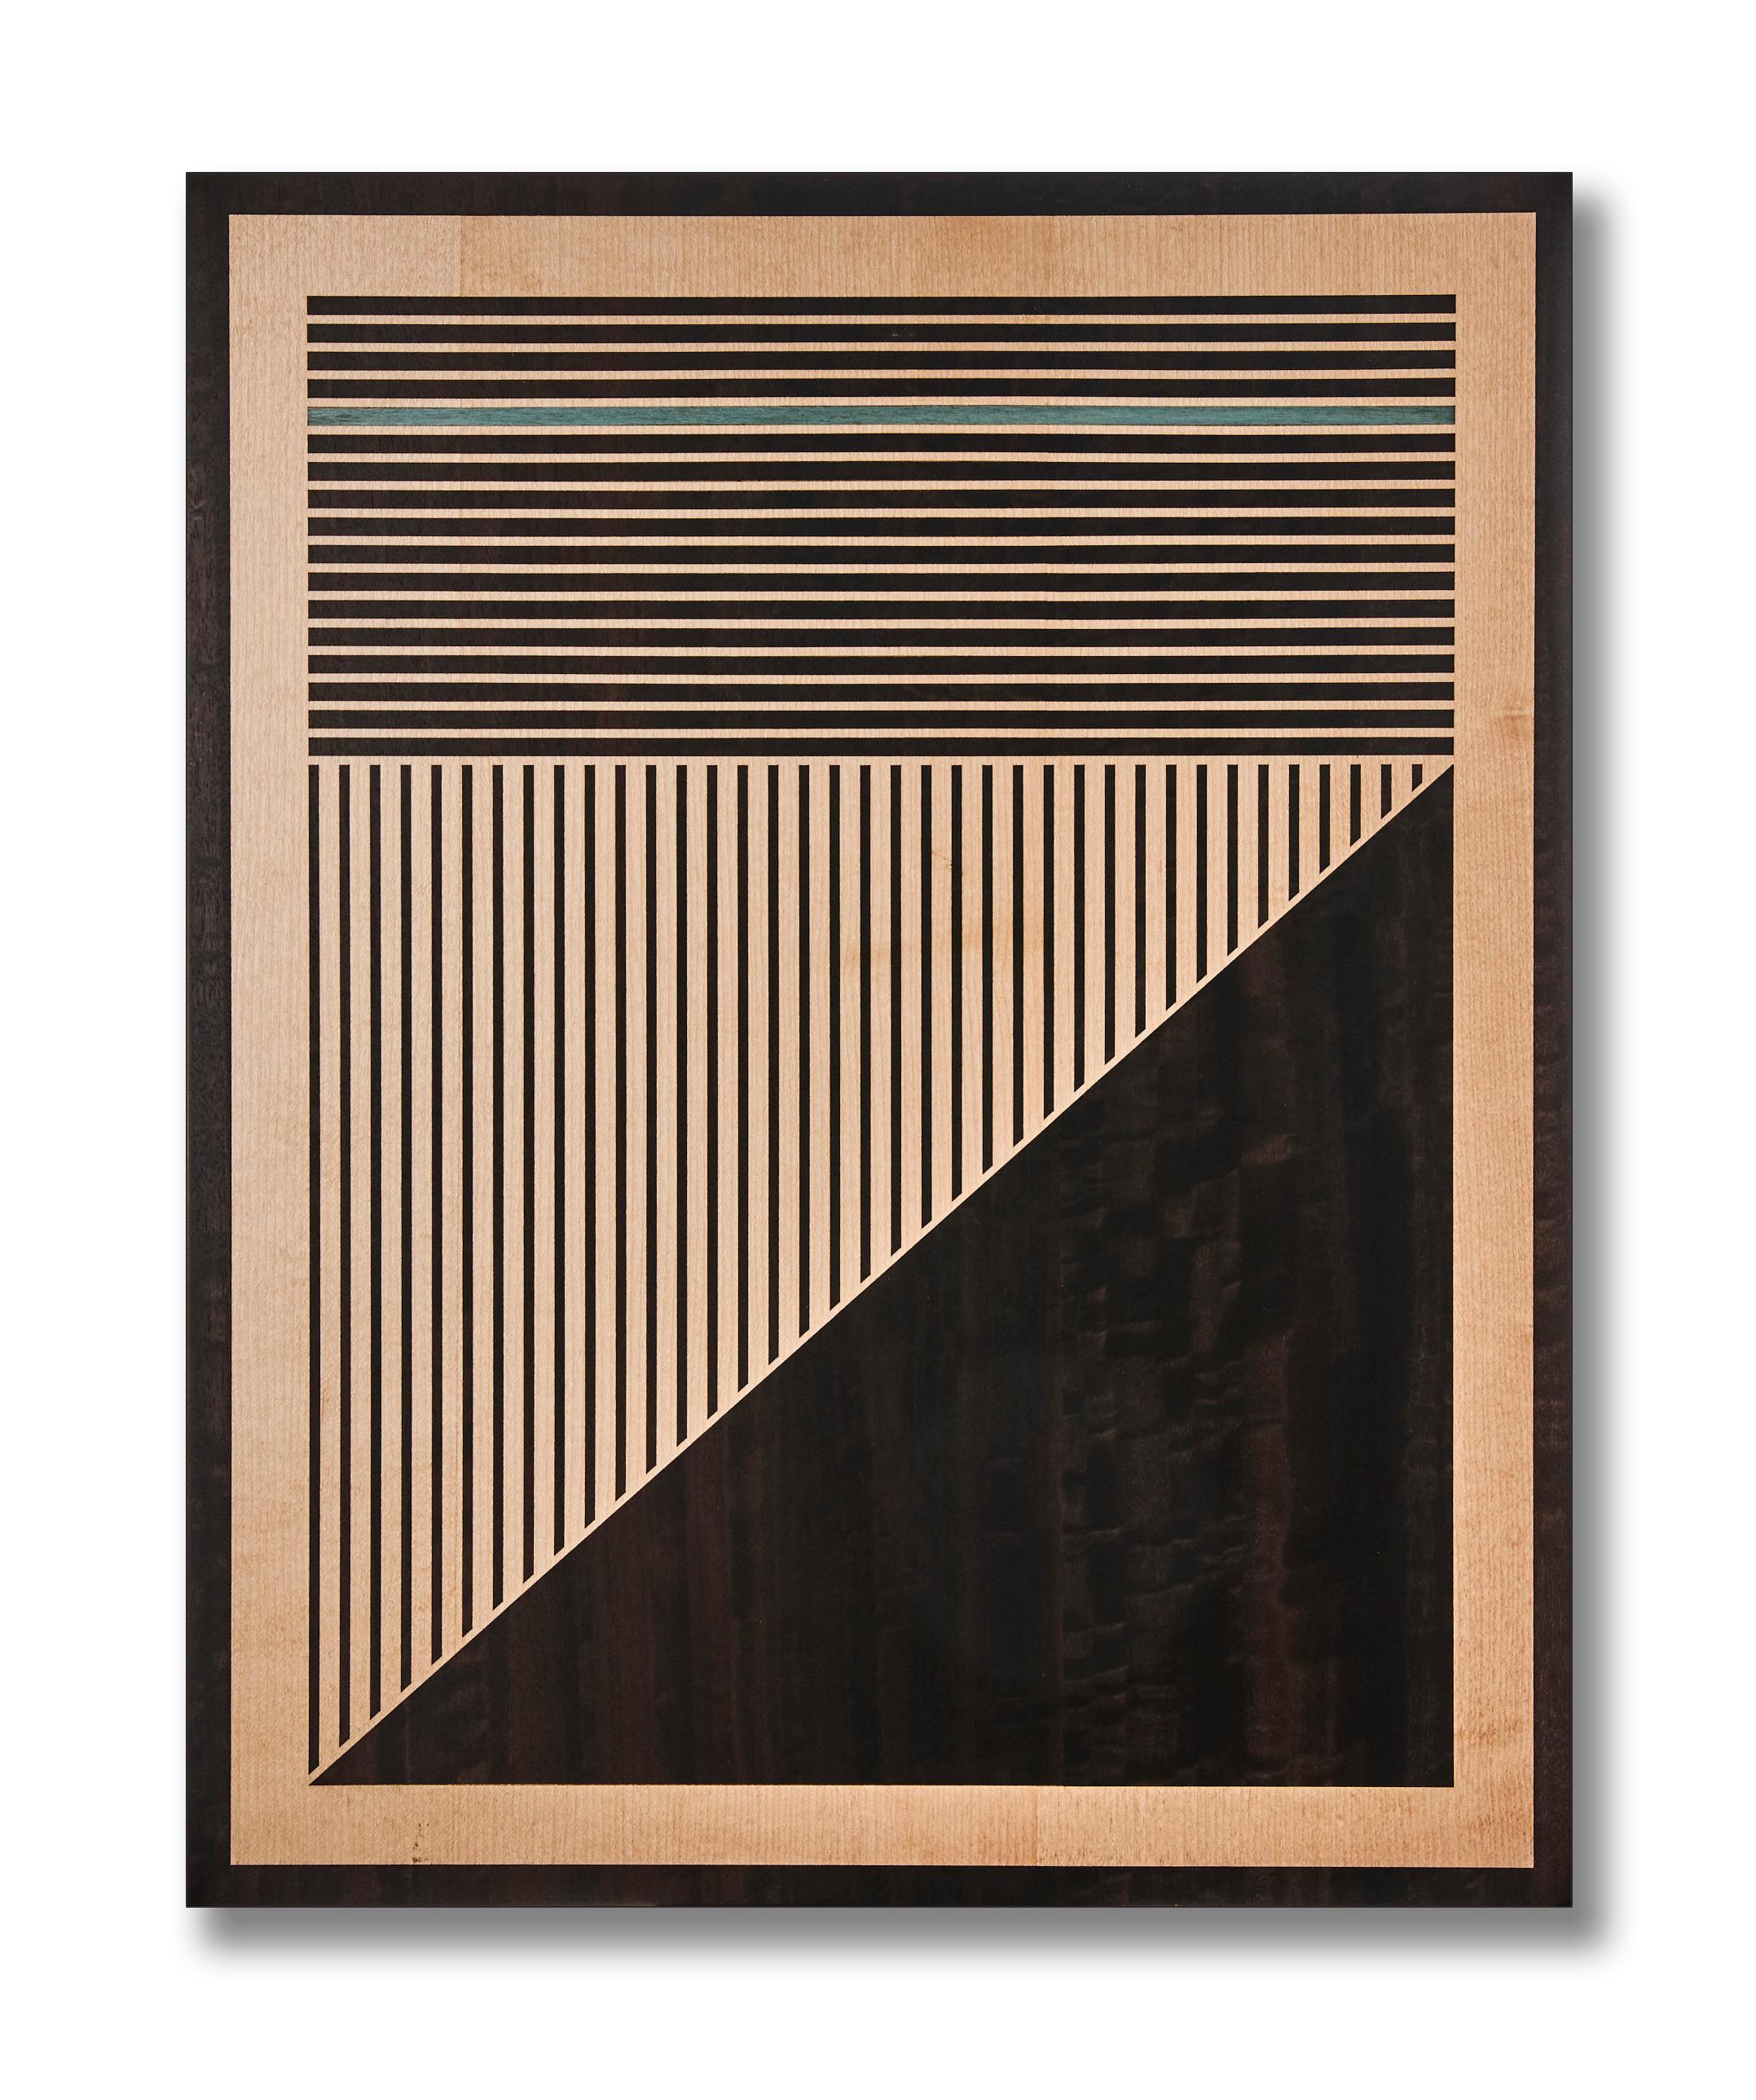 This recent triptych from the w o o d p o p studio is an example of the type of modern marquetry that  w o o d p o p  is becoming synonymous with.  Since its inception 10 years ago - the studio has specialised in marquetry and inlay work; meticulous